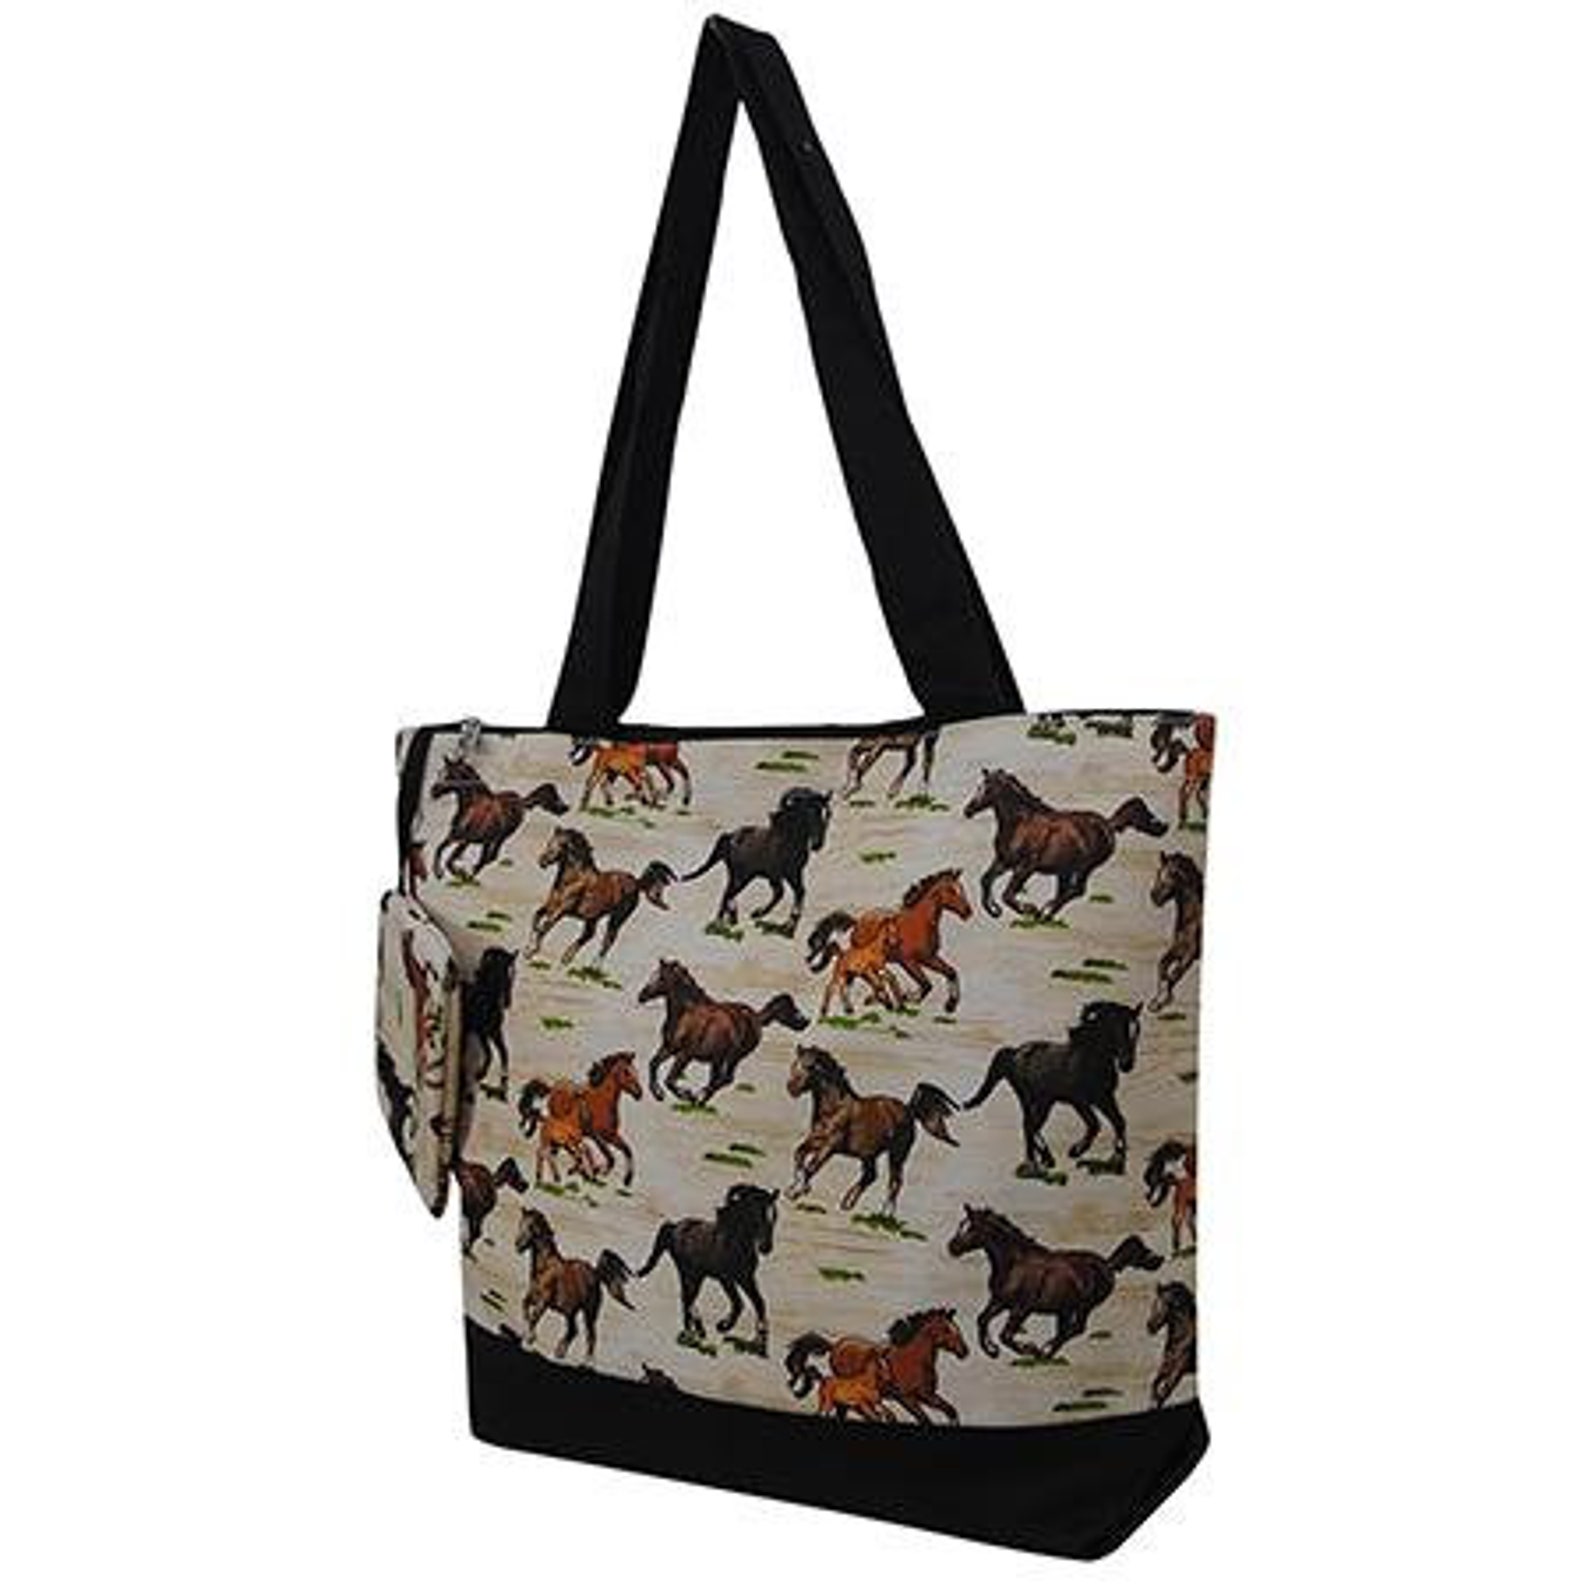 Wild Leopard NGIL Canvas Tote Bag With Free Monogram - Etsy